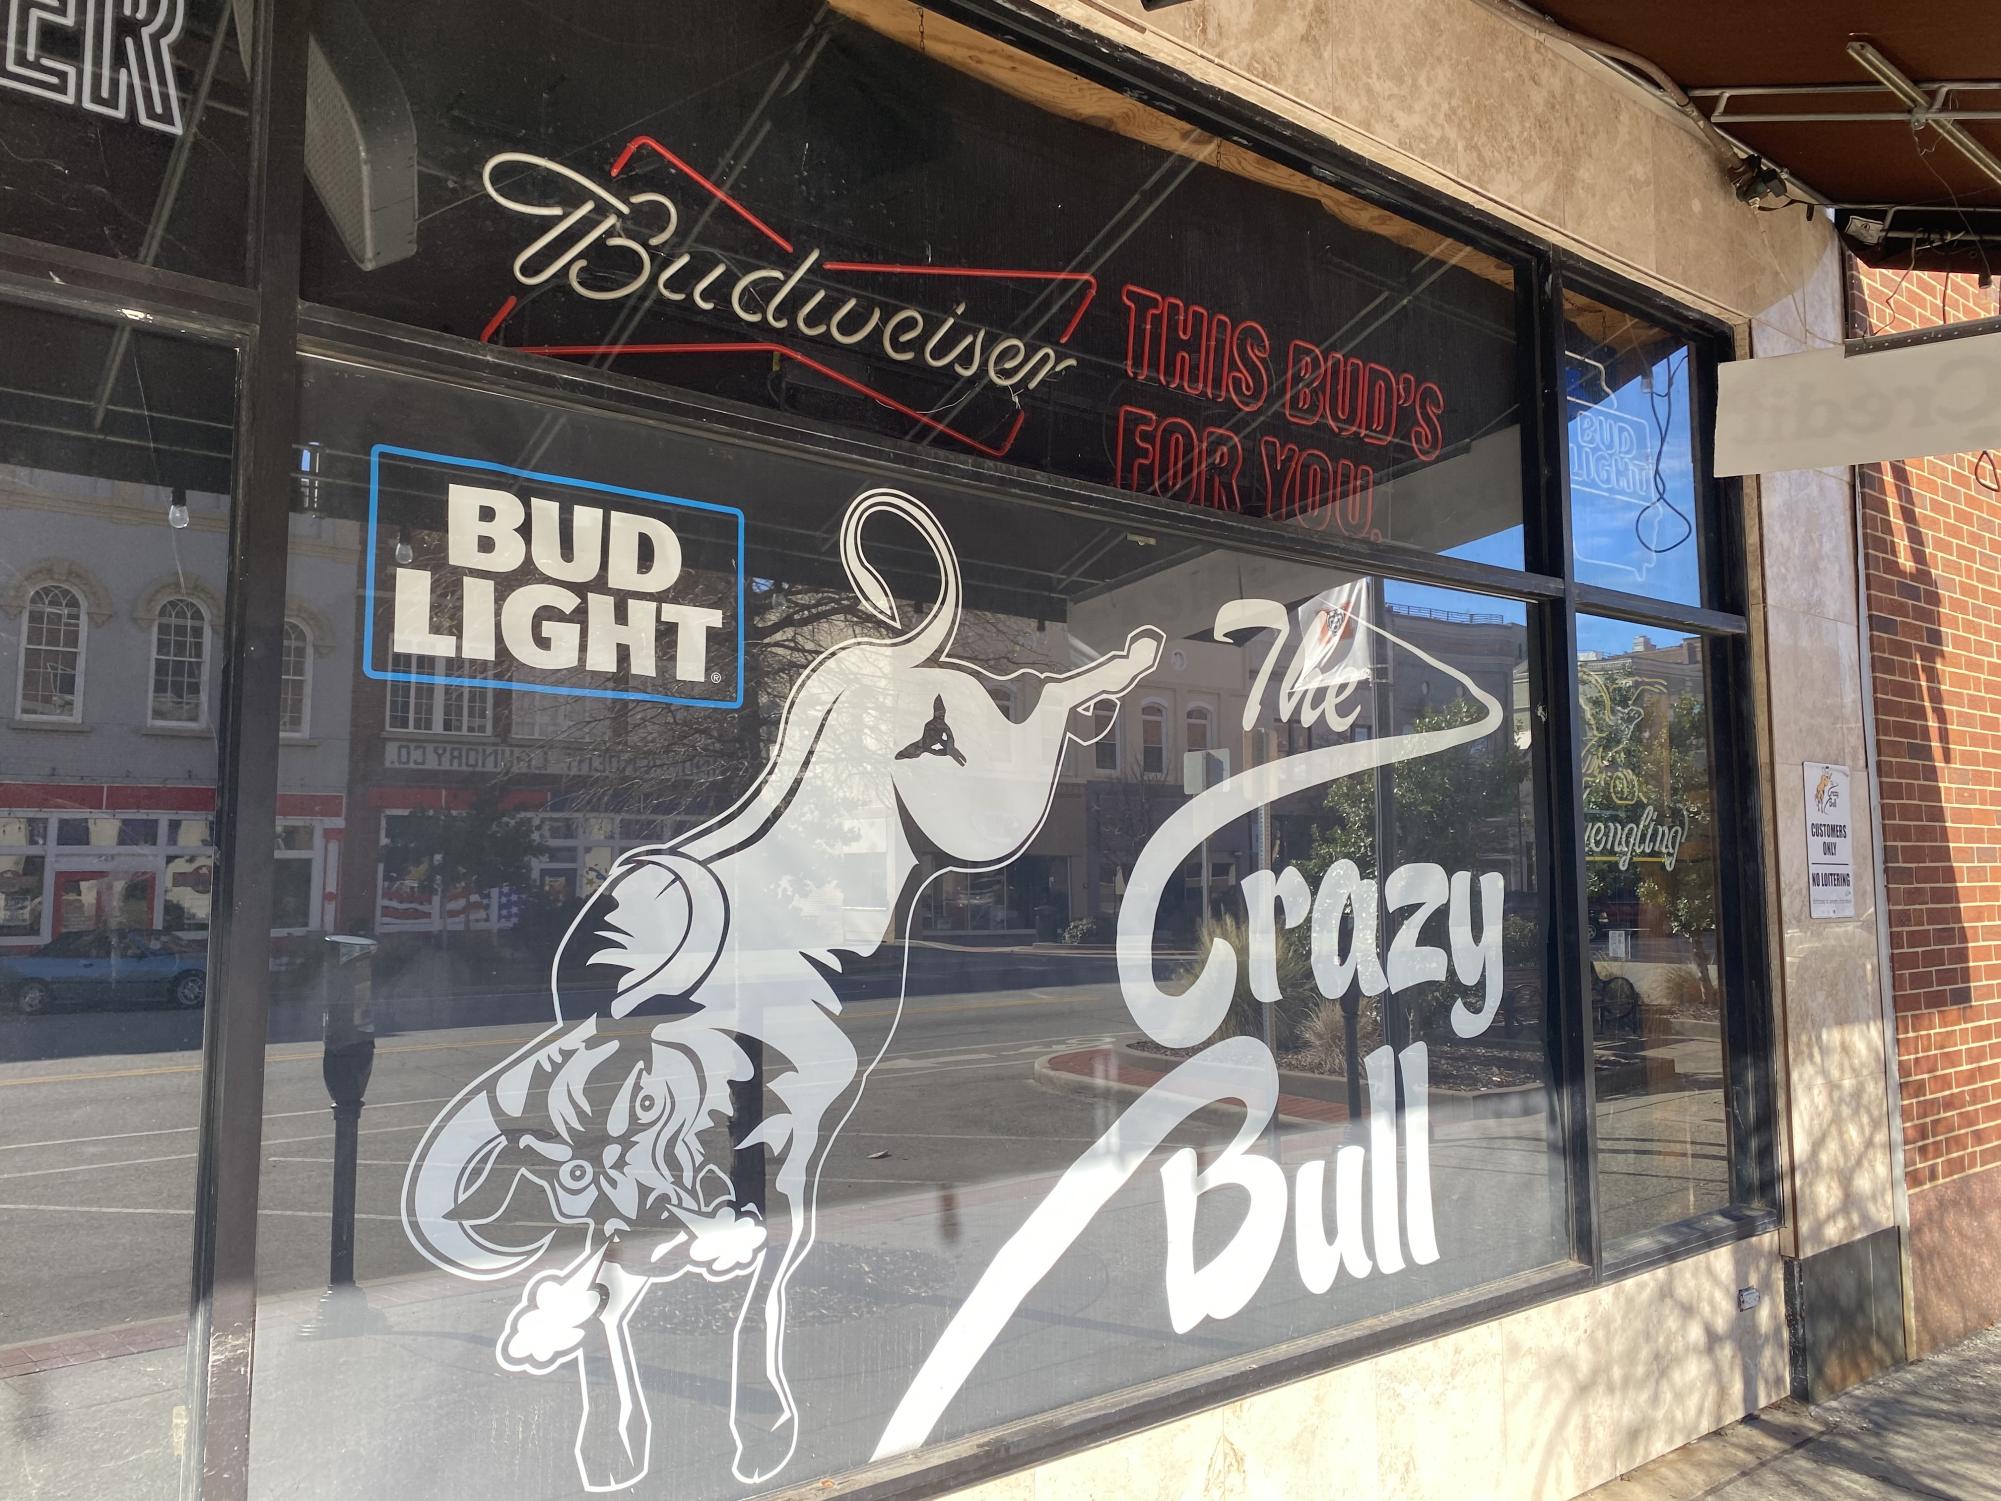 The Death of The Crazy Bull